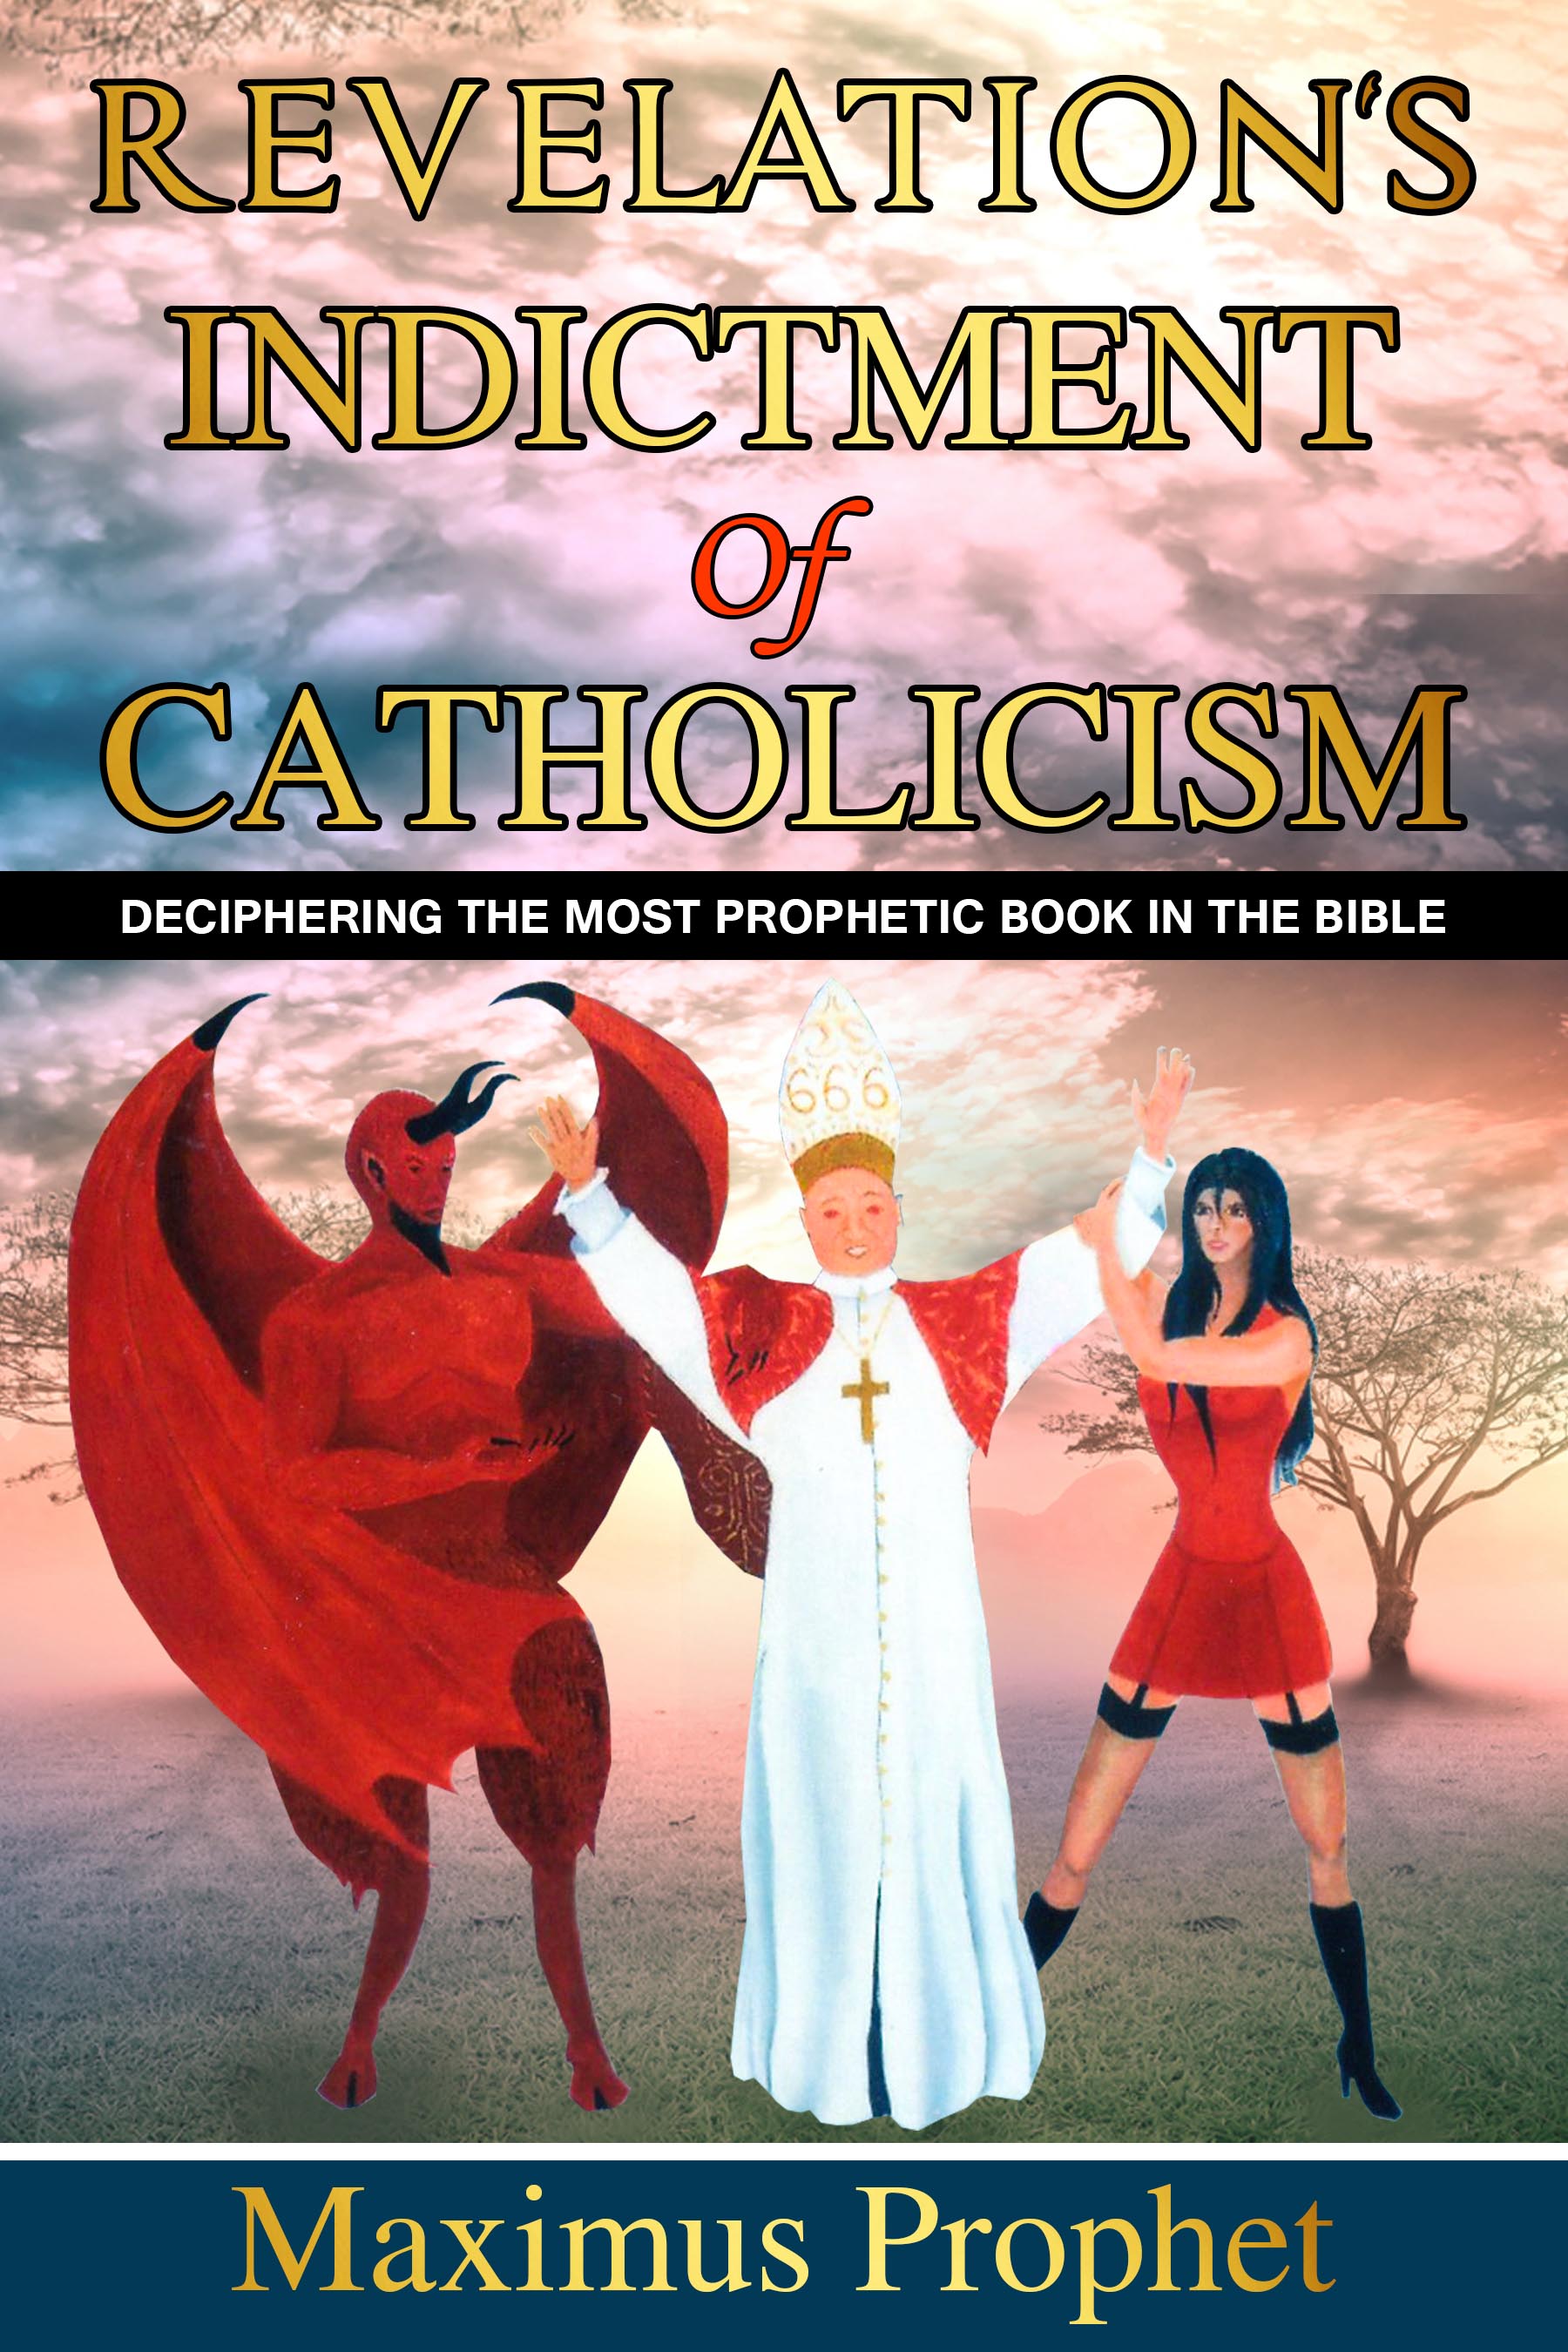 Revelation's Indictment Of Catholicism book cover.